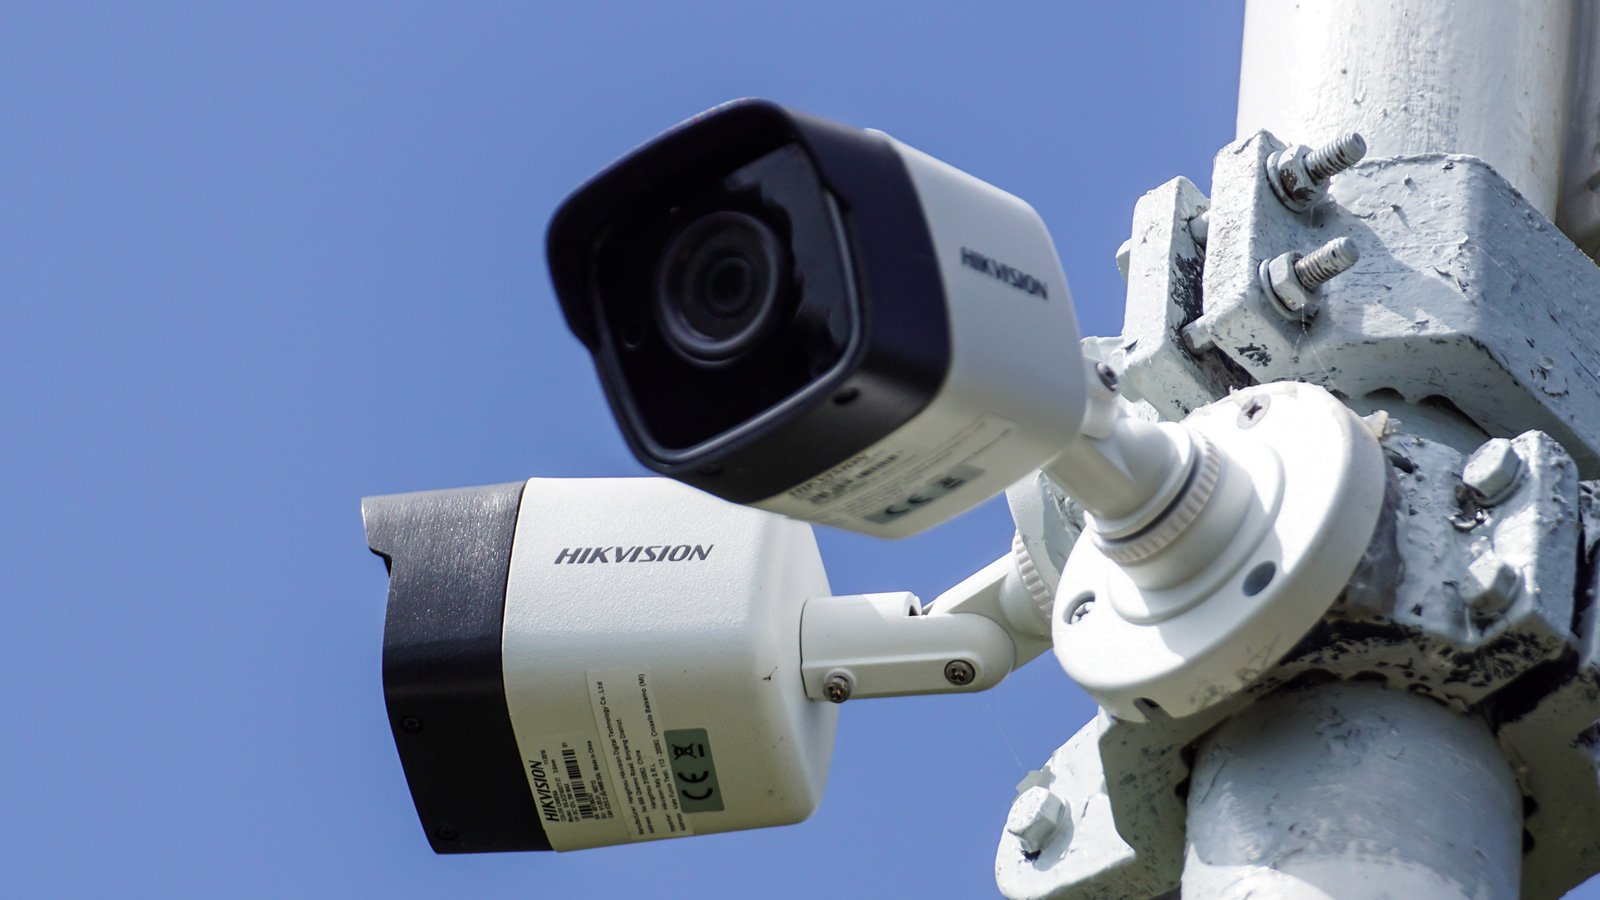 Over 80,000 exploitable Hikvision cameras exposed online